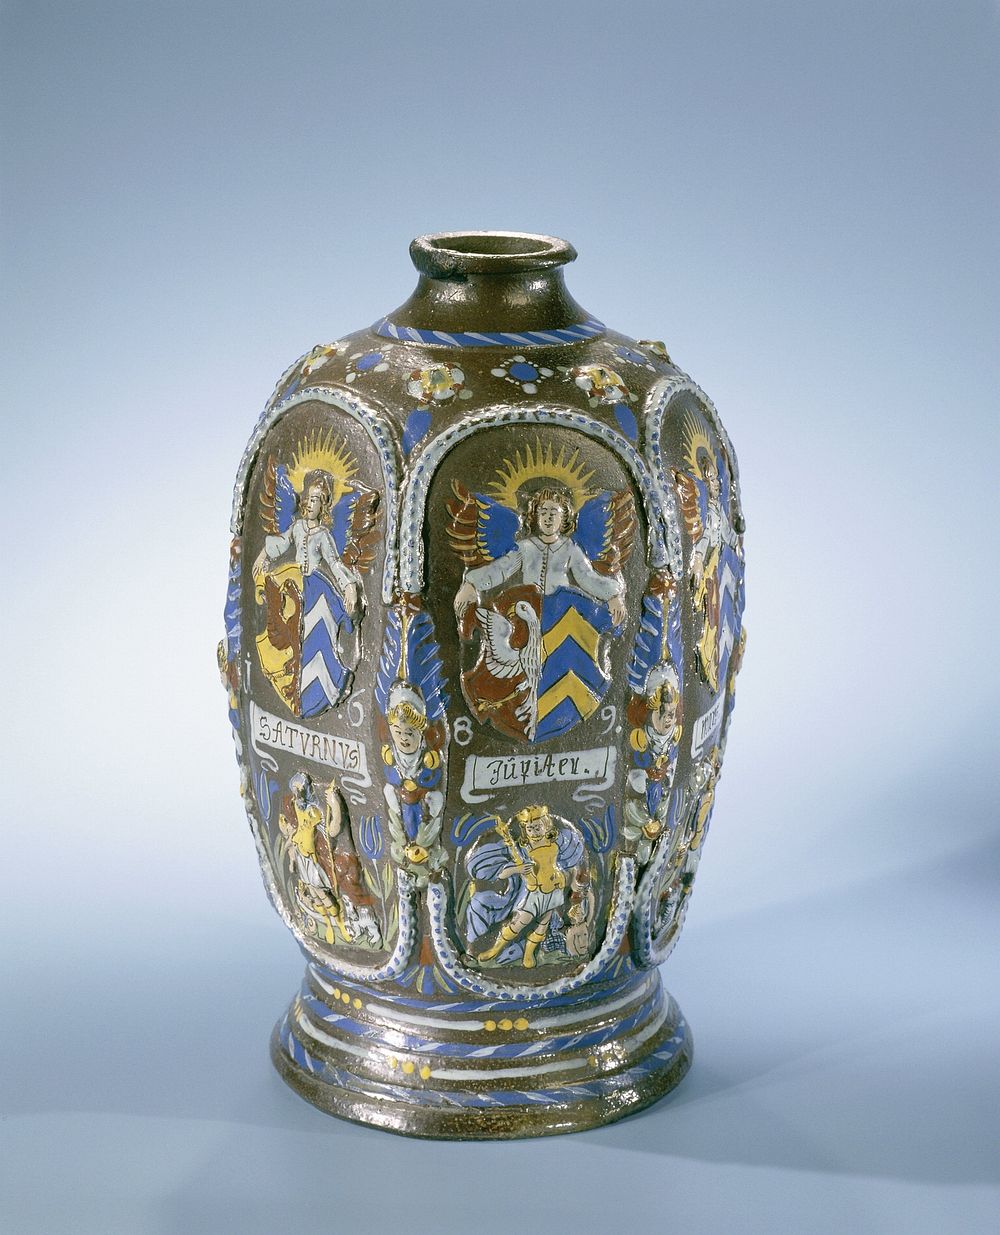 Hexagonal bottle (kruke) with the planets and a coat of arms (1689) by anonymous